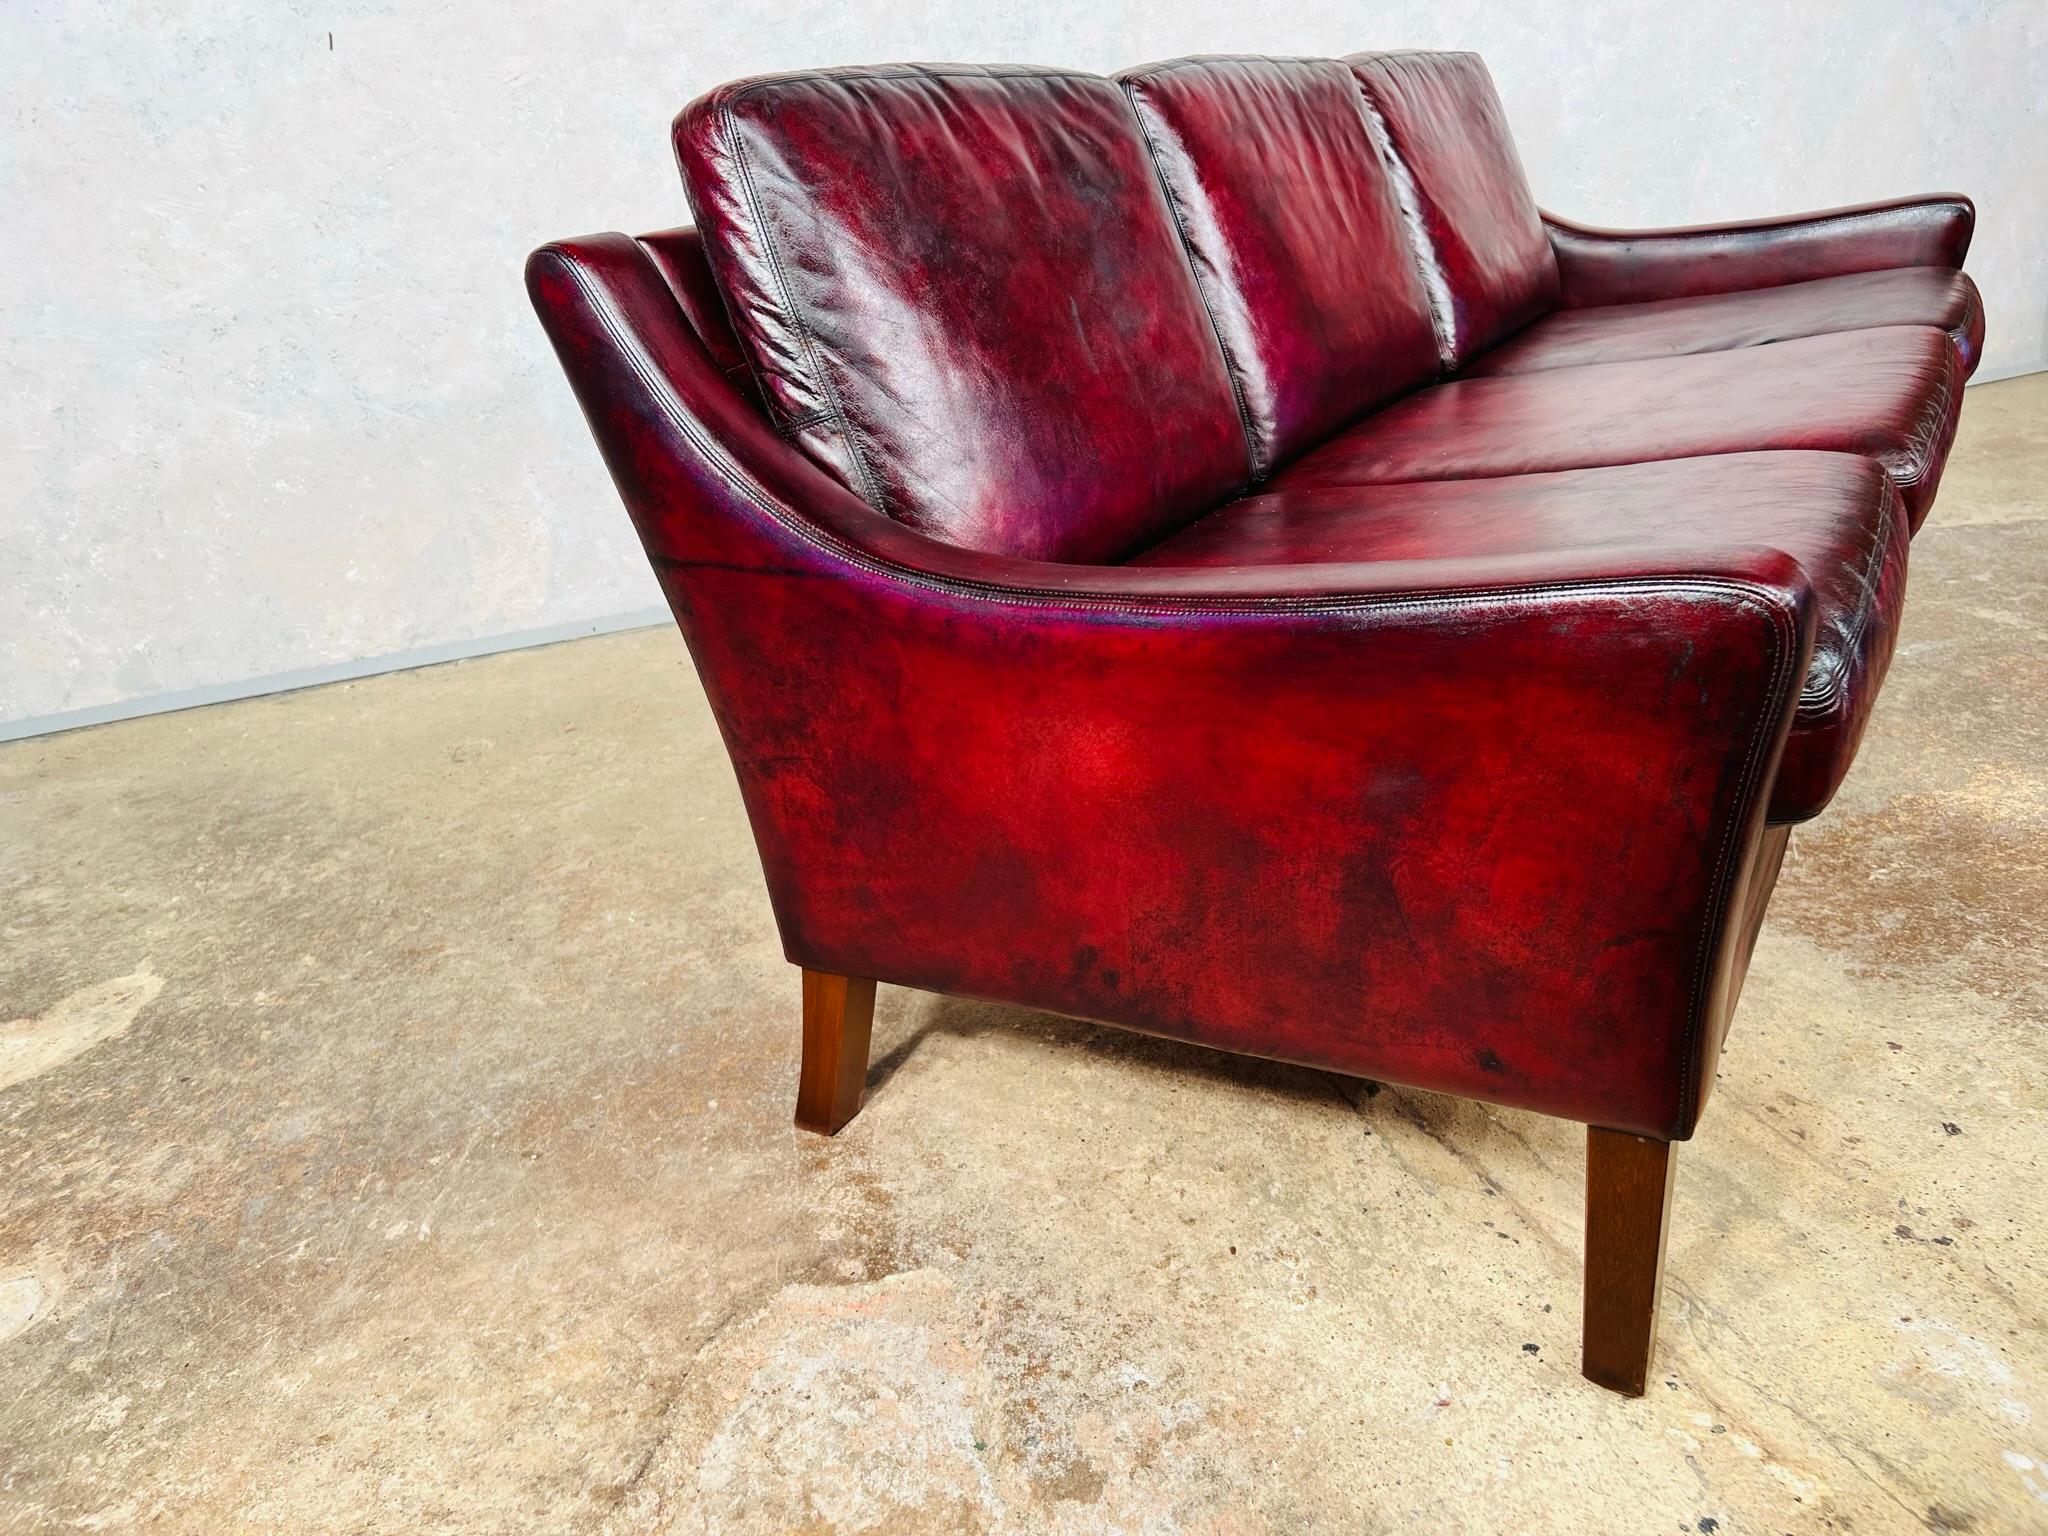 A Compact Vintage Danish 1970s Deep Red Three Seater Leather Sofa For Sale 2